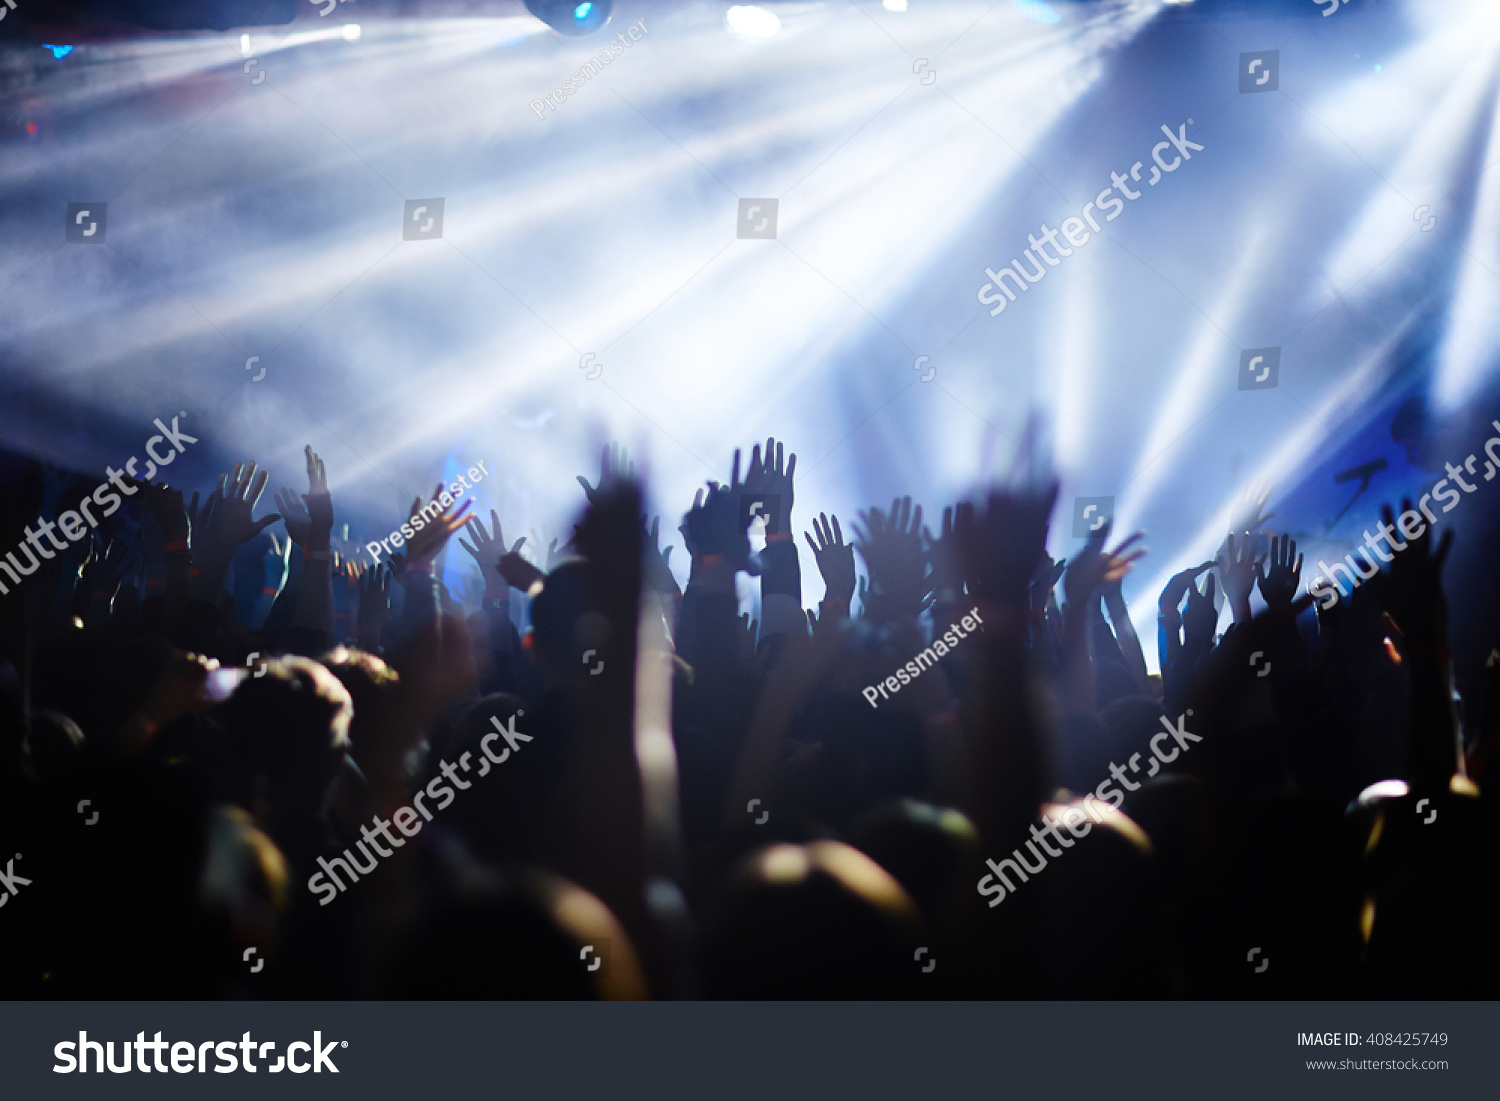 Crowd with raised hands #408425749